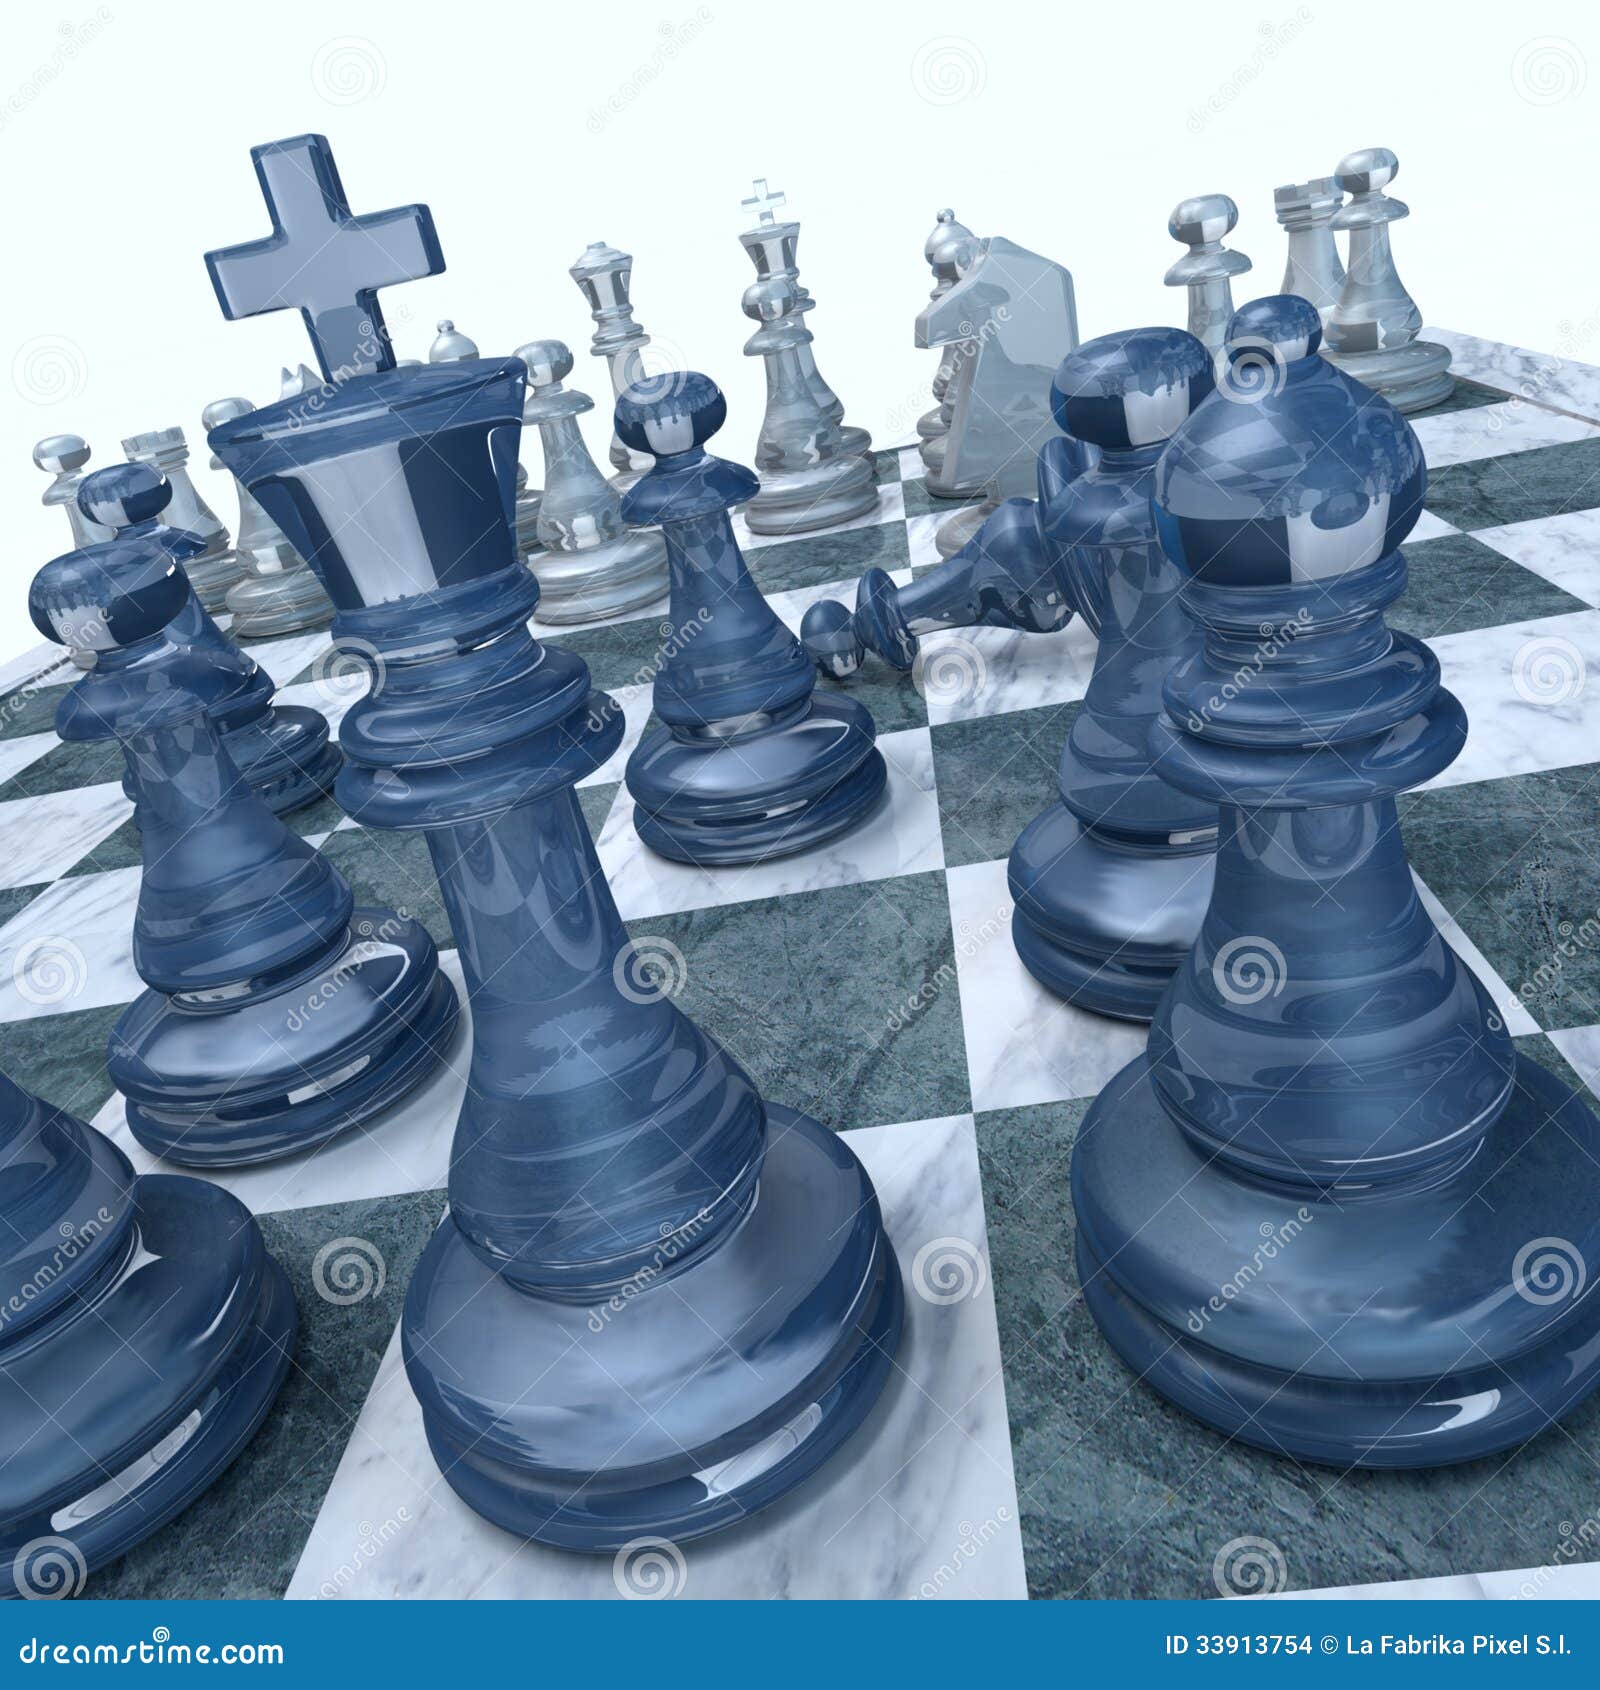 https://thumbs.dreamstime.com/z/chess-game-ongoing-pawn-down-33913754.jpg